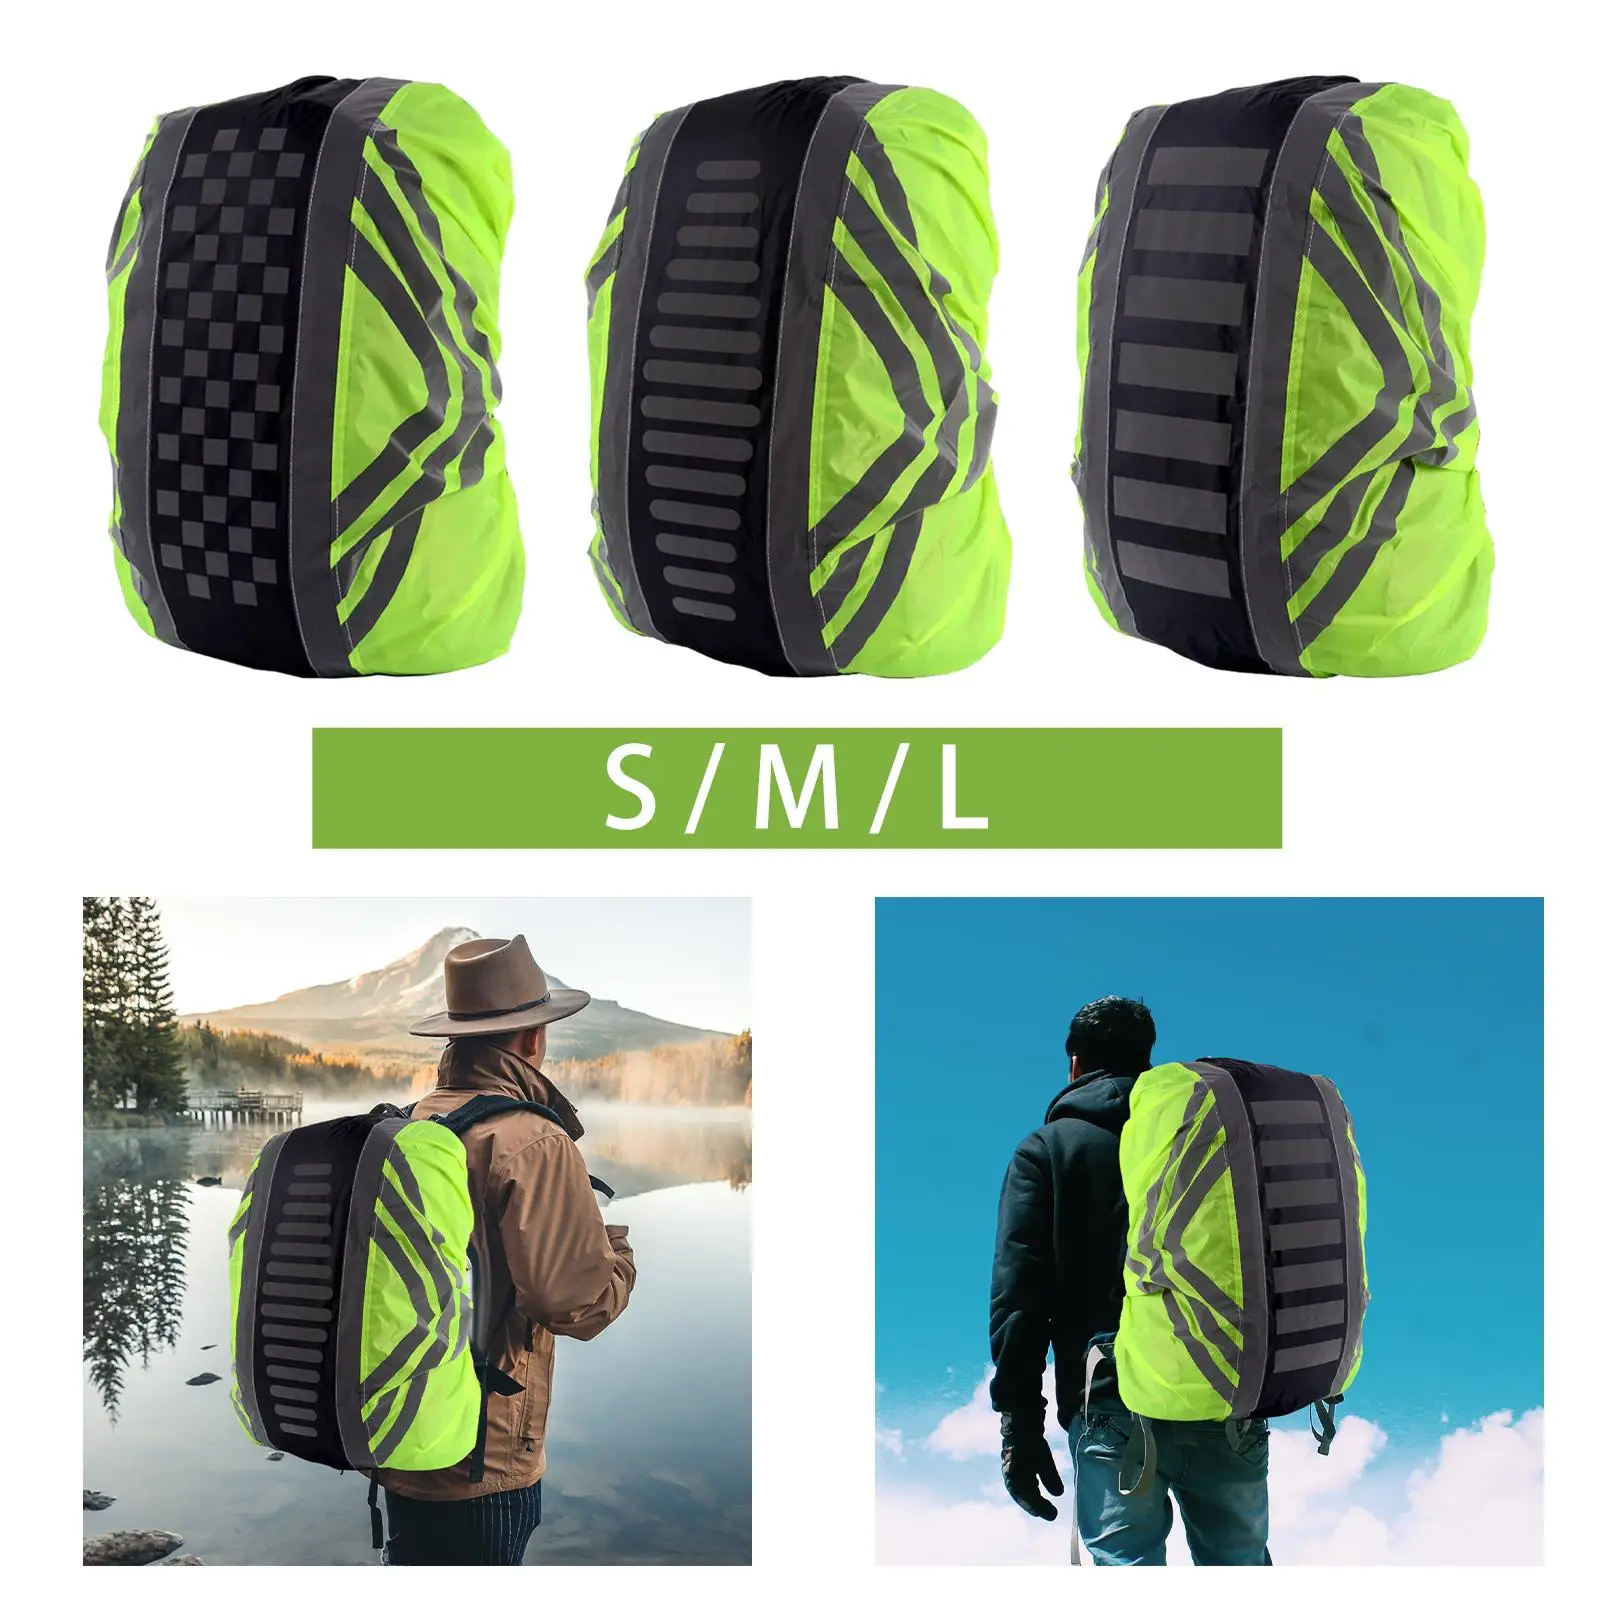 Backpack Rain Cover Waterproof Dustproof Protective Cover with Reflective Strip for Outdoor Traveling Biking Camping Hiking